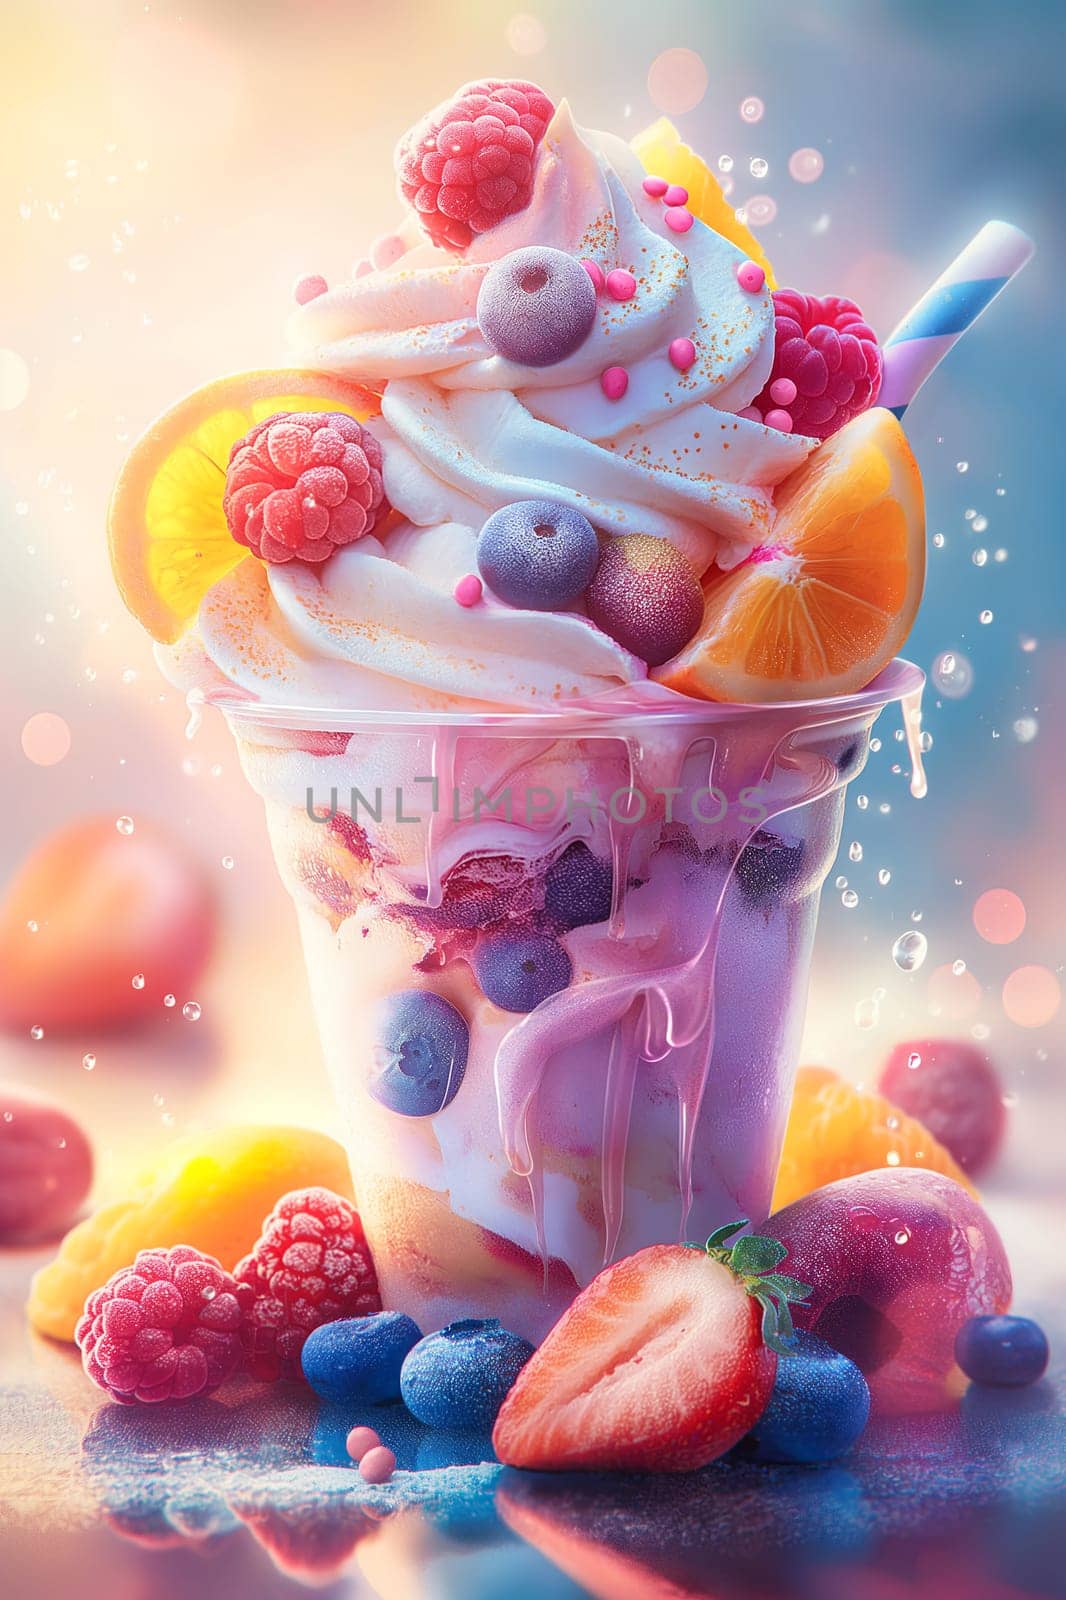 Illustration of a colorful fruit dessert topped with whipped cream, berries, and a slice of orange. by Hype2art